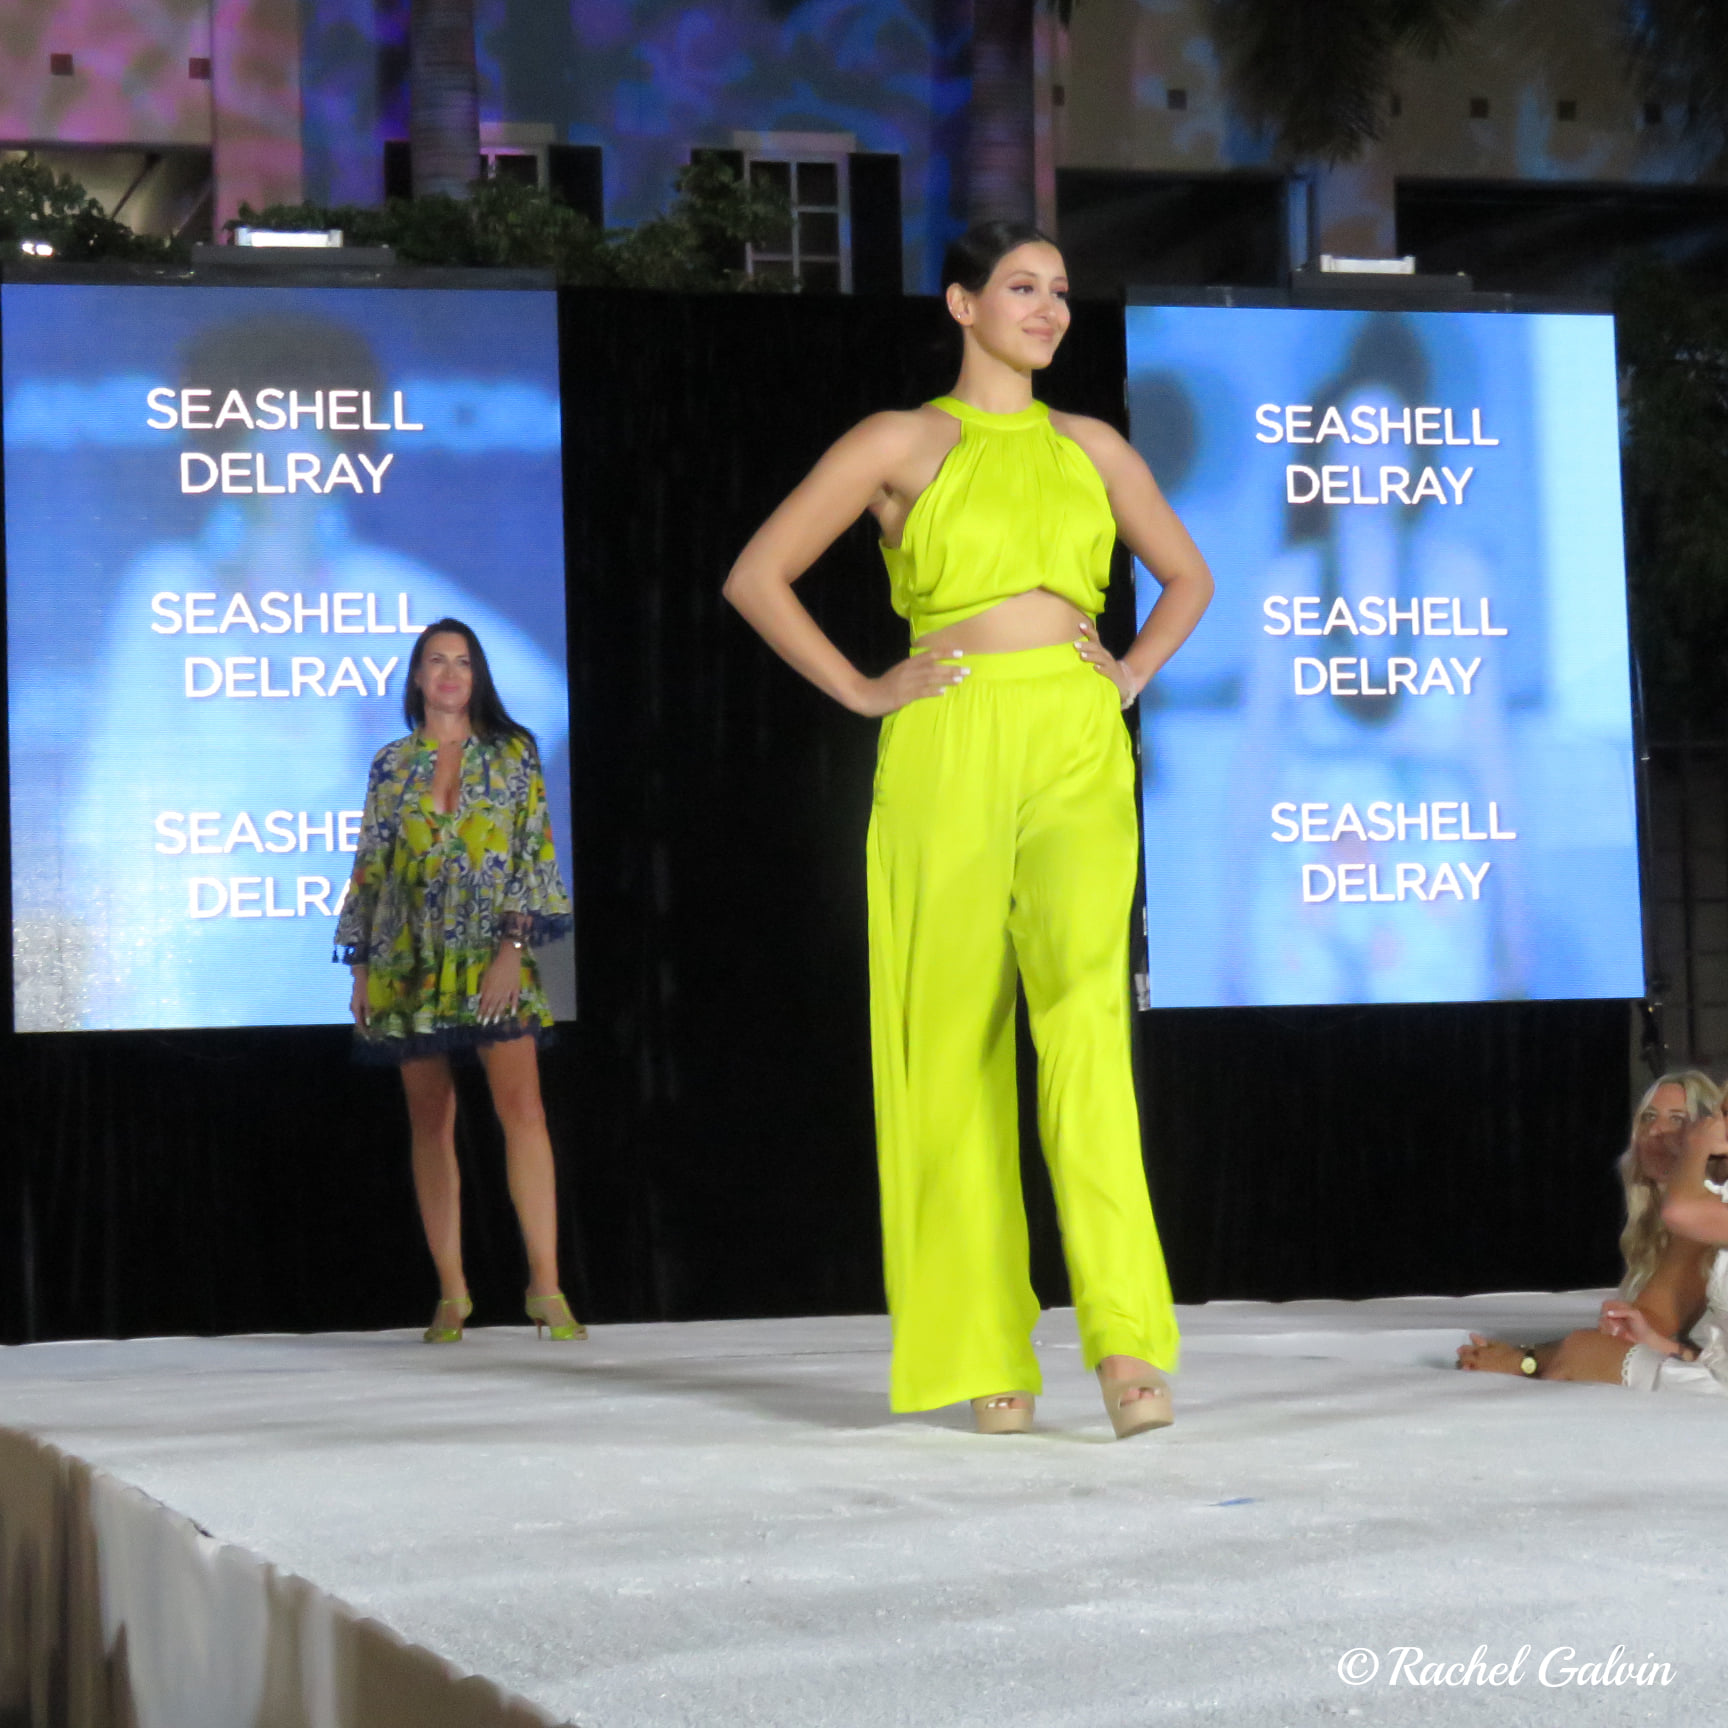 Delray Fashion Week gives back to children's charity while sporting